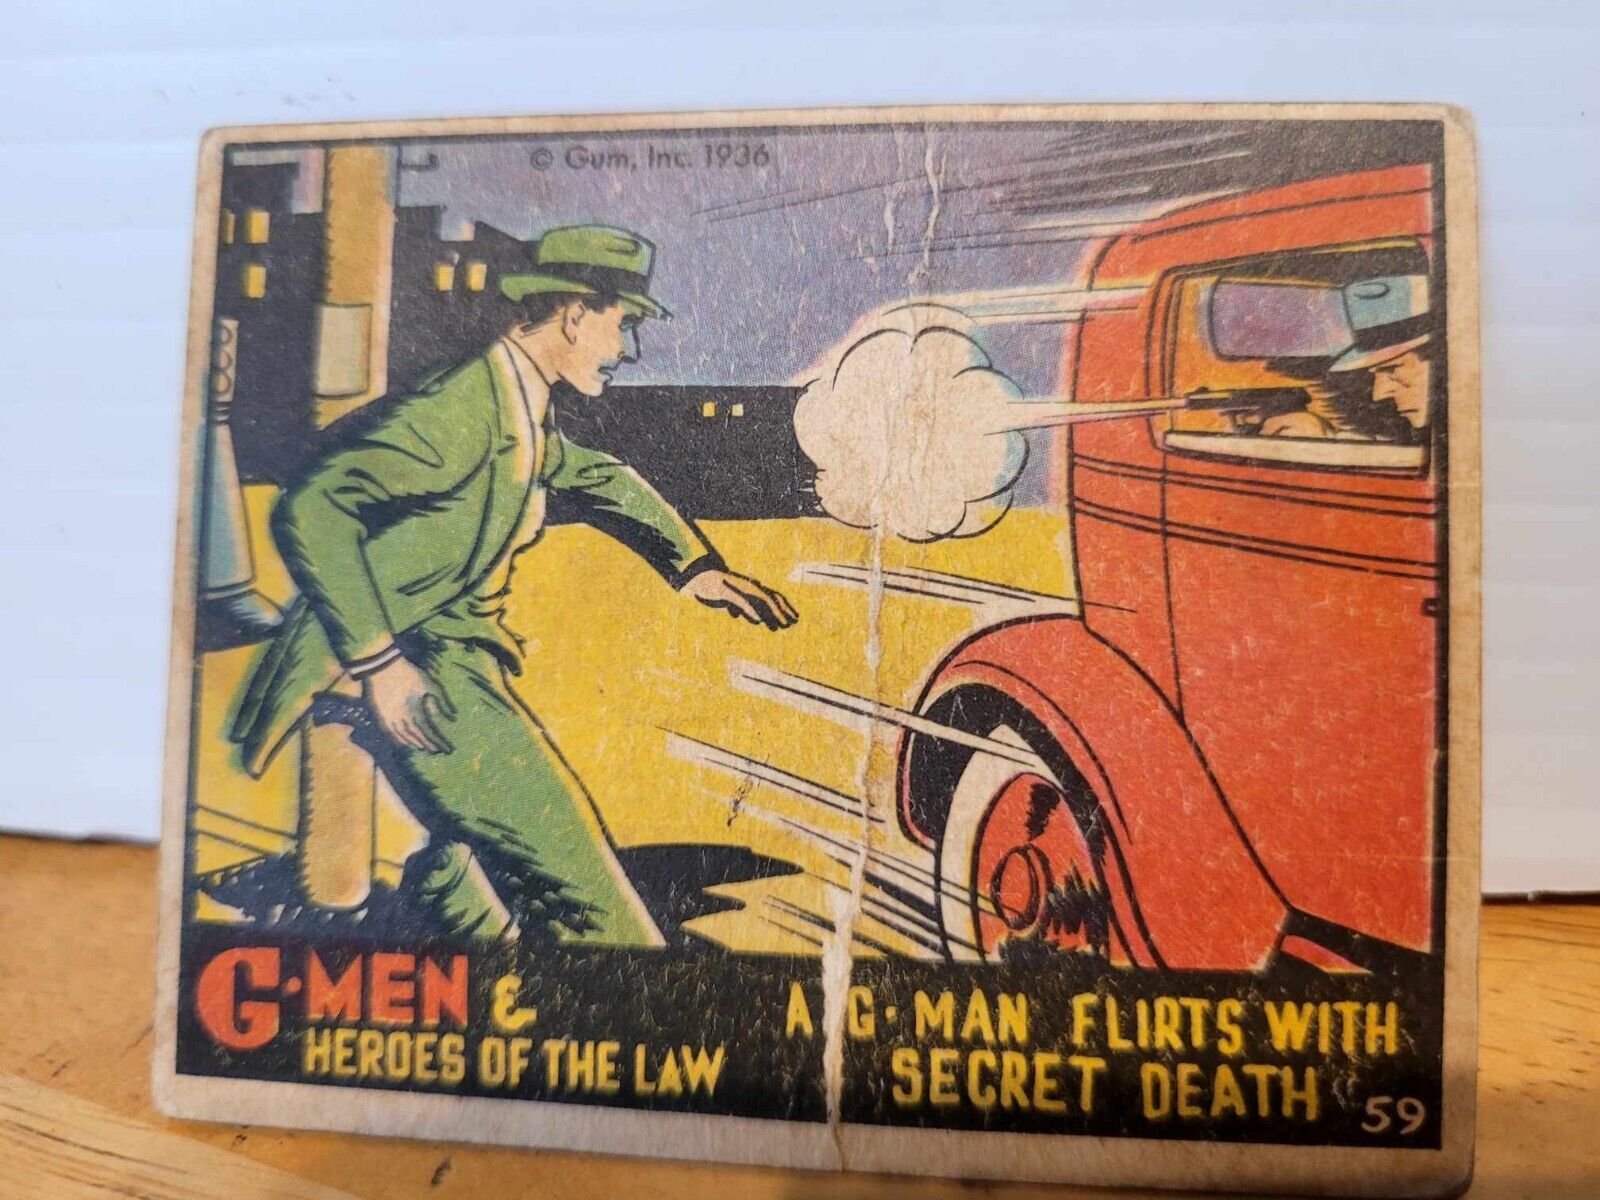 TOPPS 1936 G-MEN HEROES OF THE LAW #59 TRADING CARD